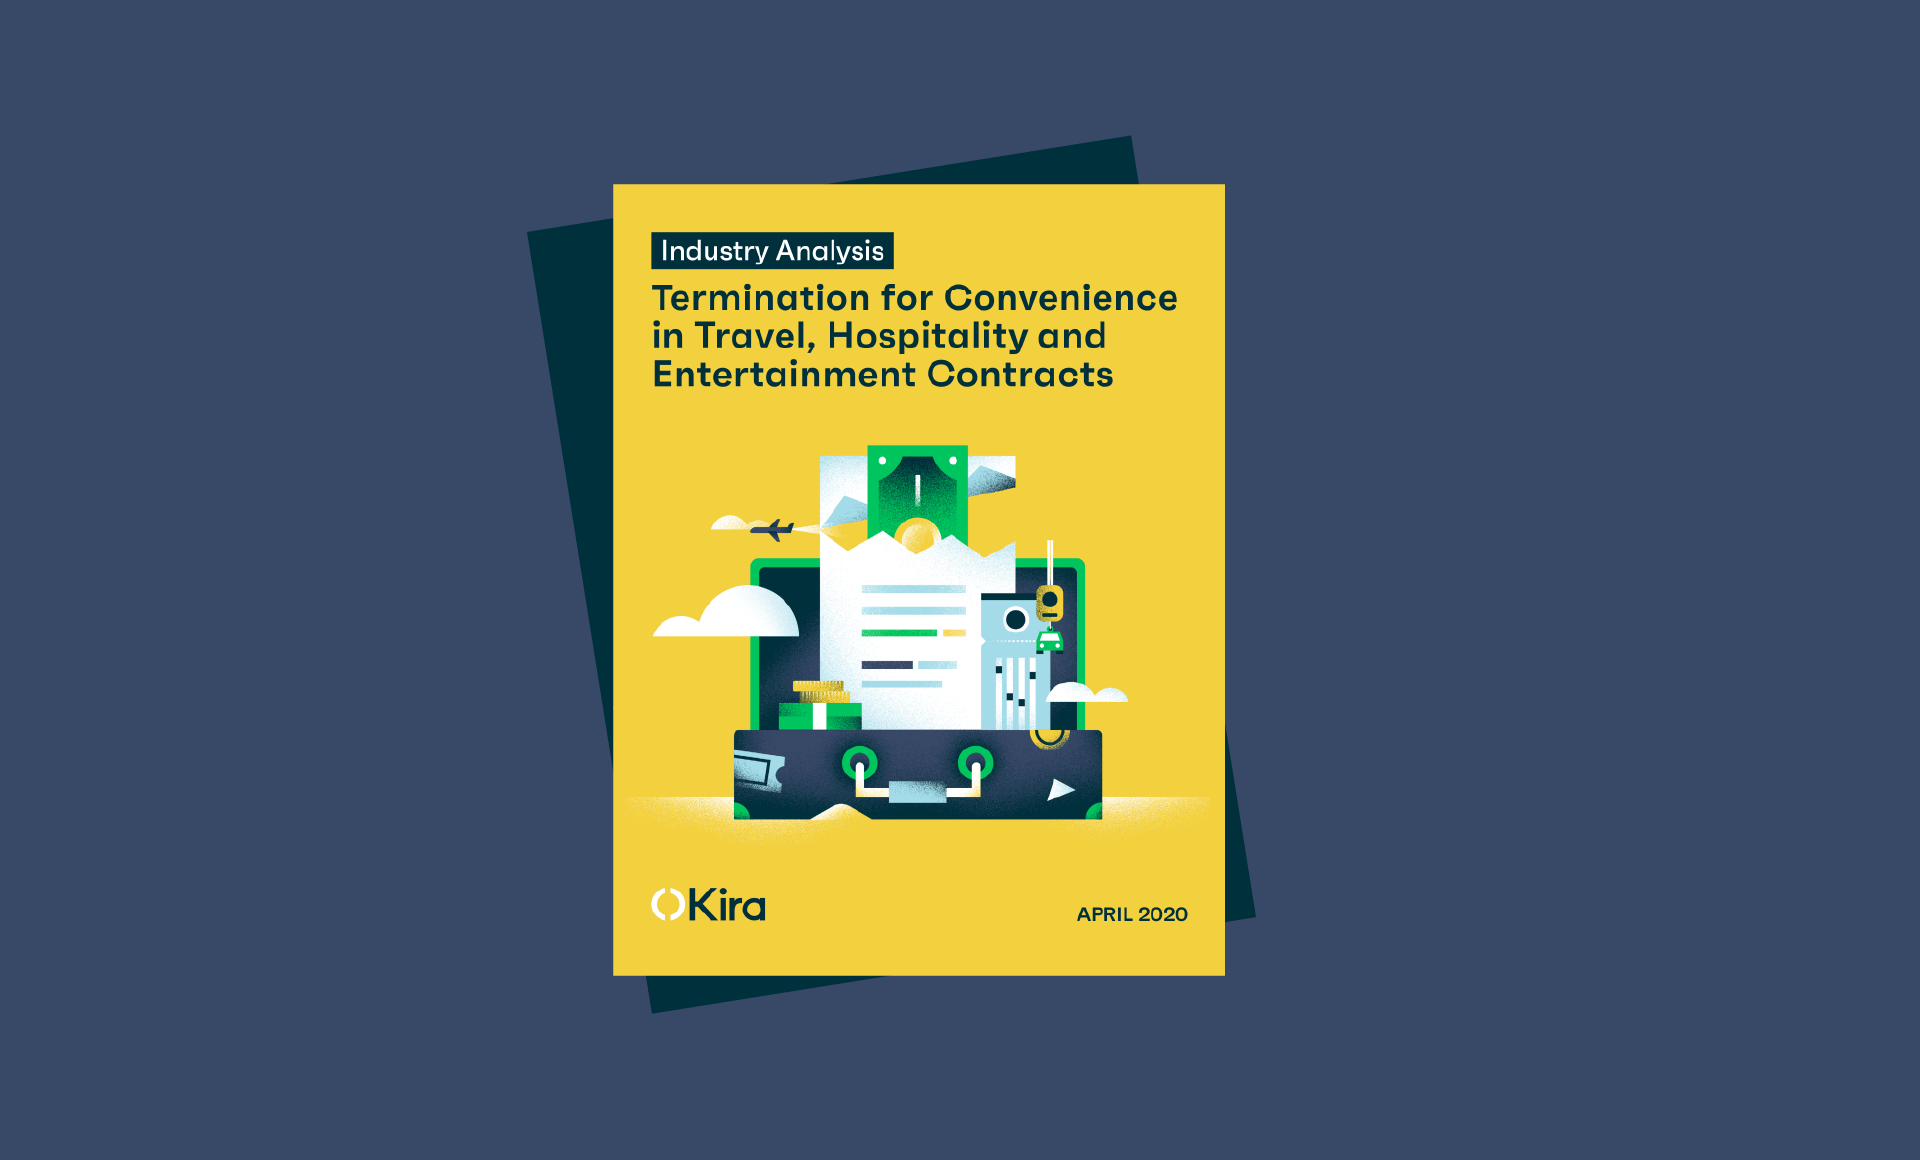 Learn more about the Industry Analysis: Termination for Convenience in Travel, Hospitality, and Entertainment Commercial Contracts